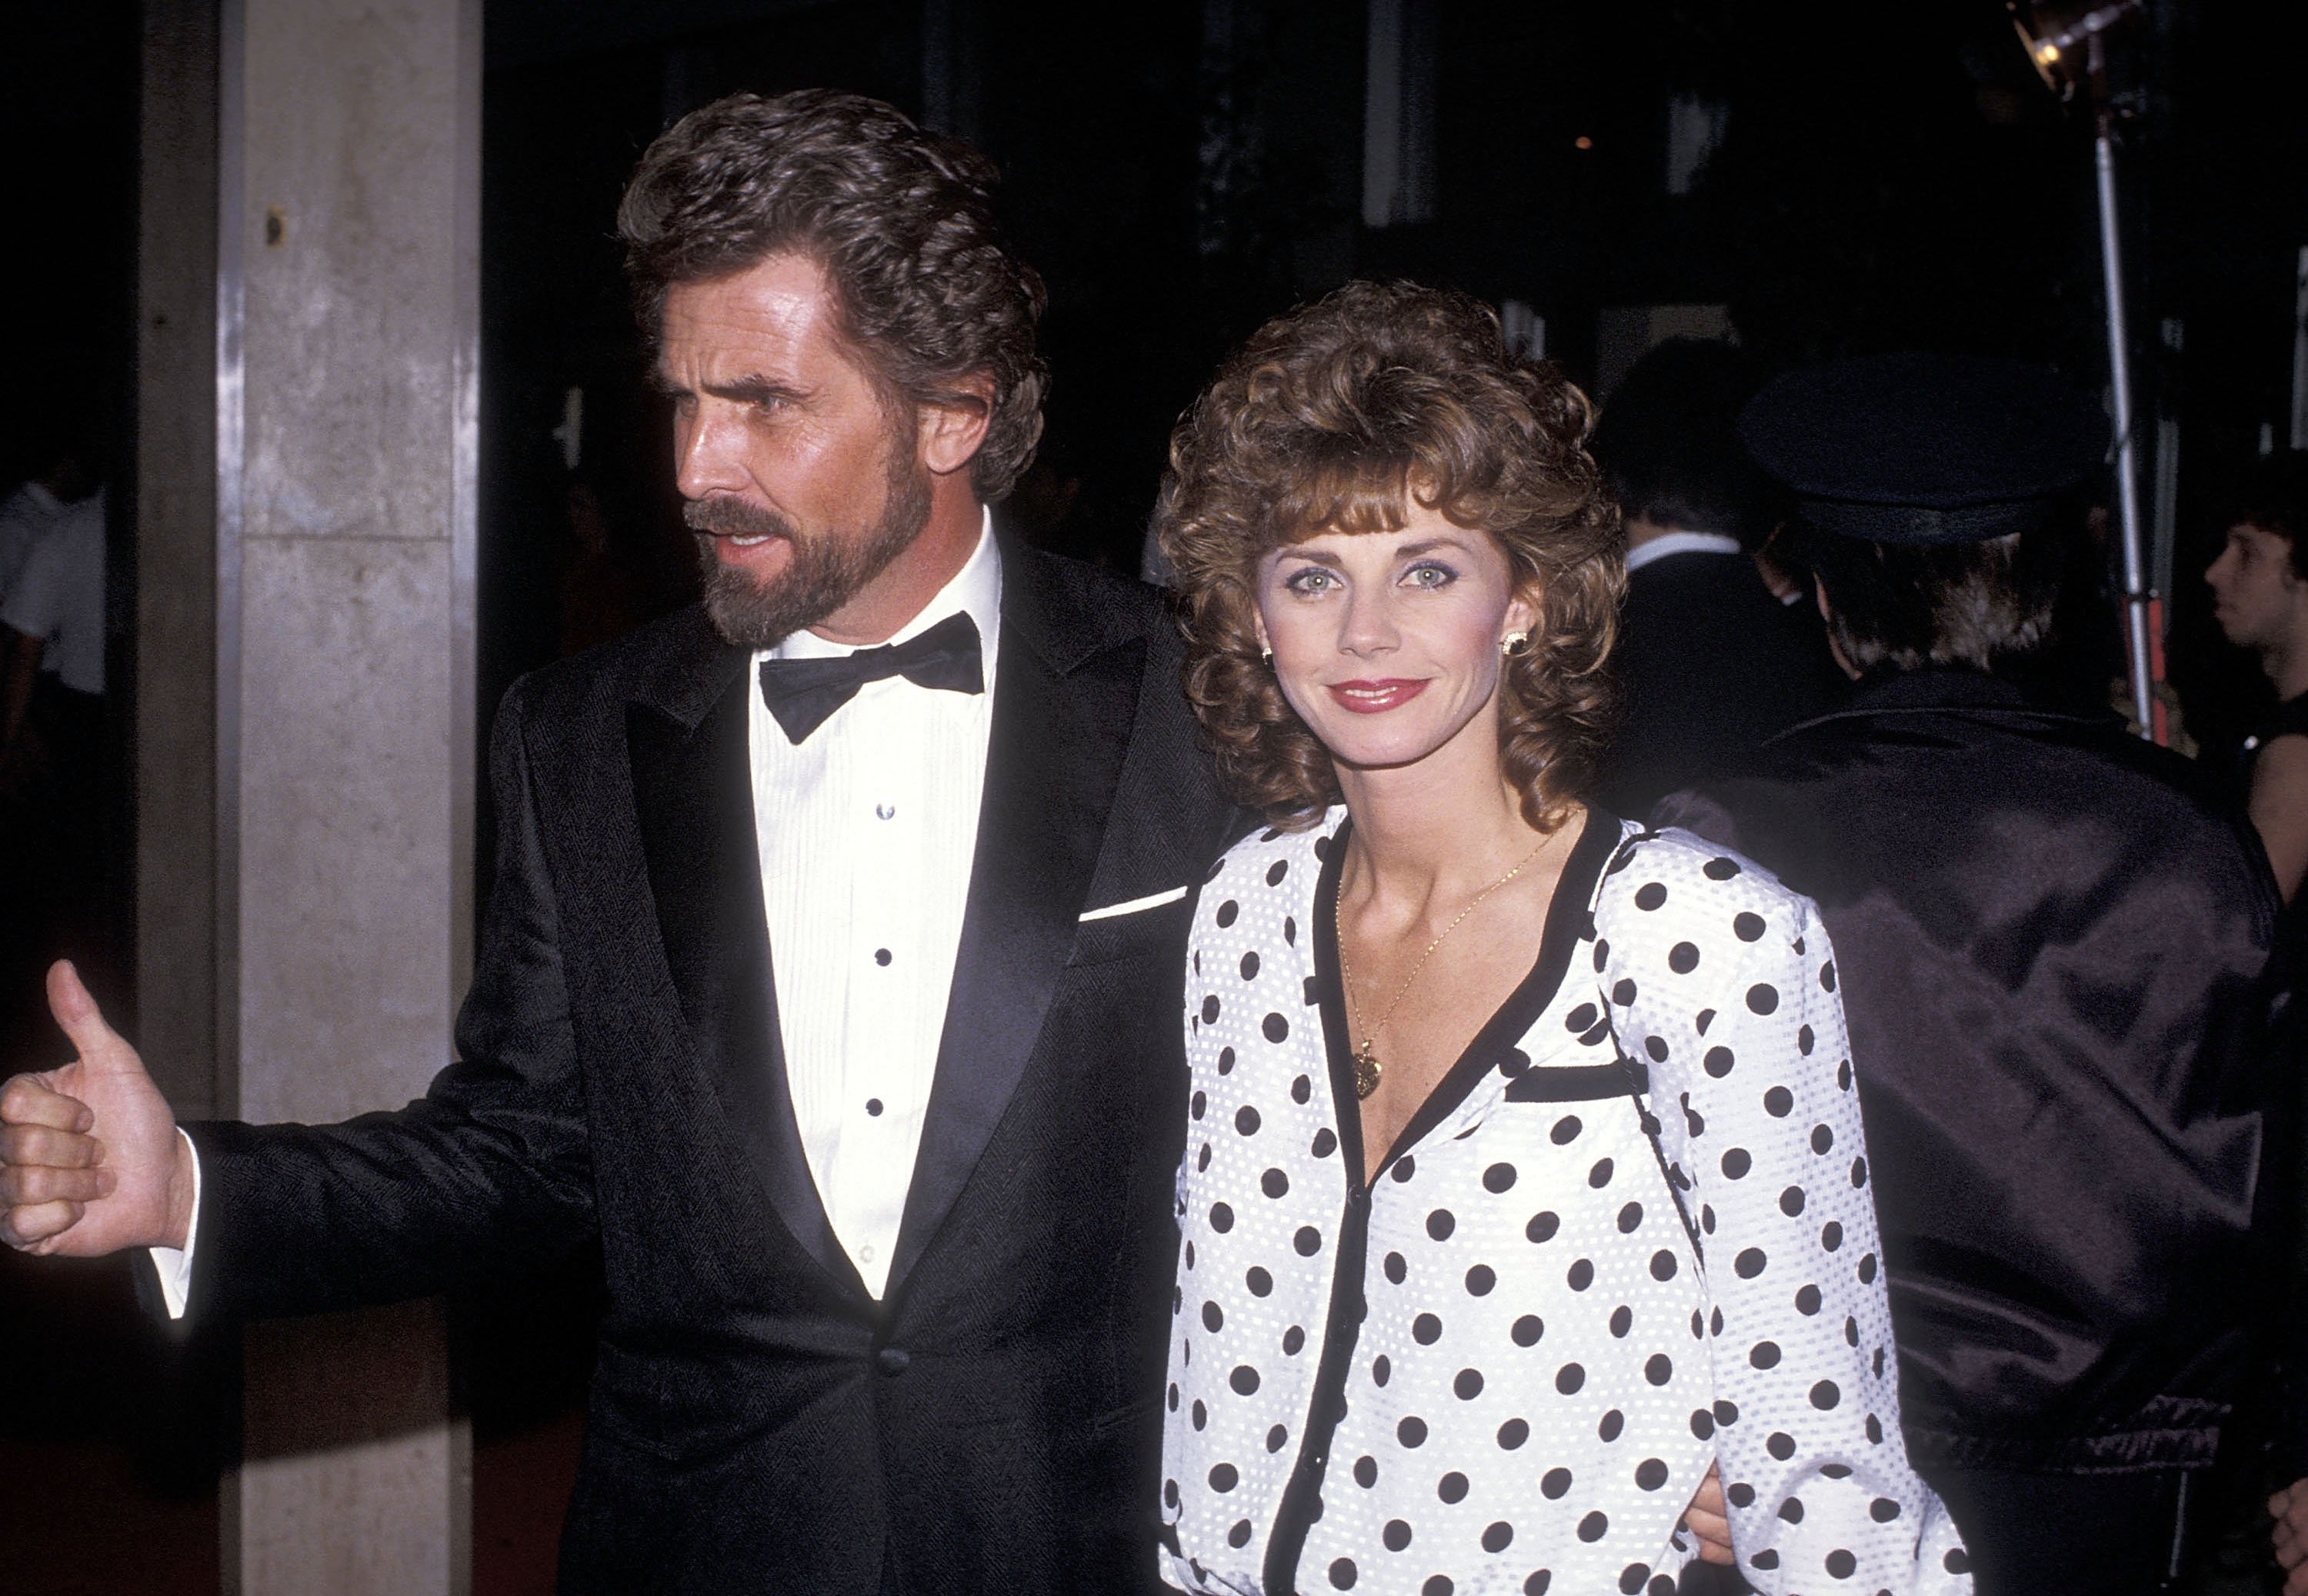 James Brolin and his girlfriend Jan Smithers at the 42nd Annual Golden Globe Awards on January 26, 1985, in Beverly Hills, California | Source: Getty Images